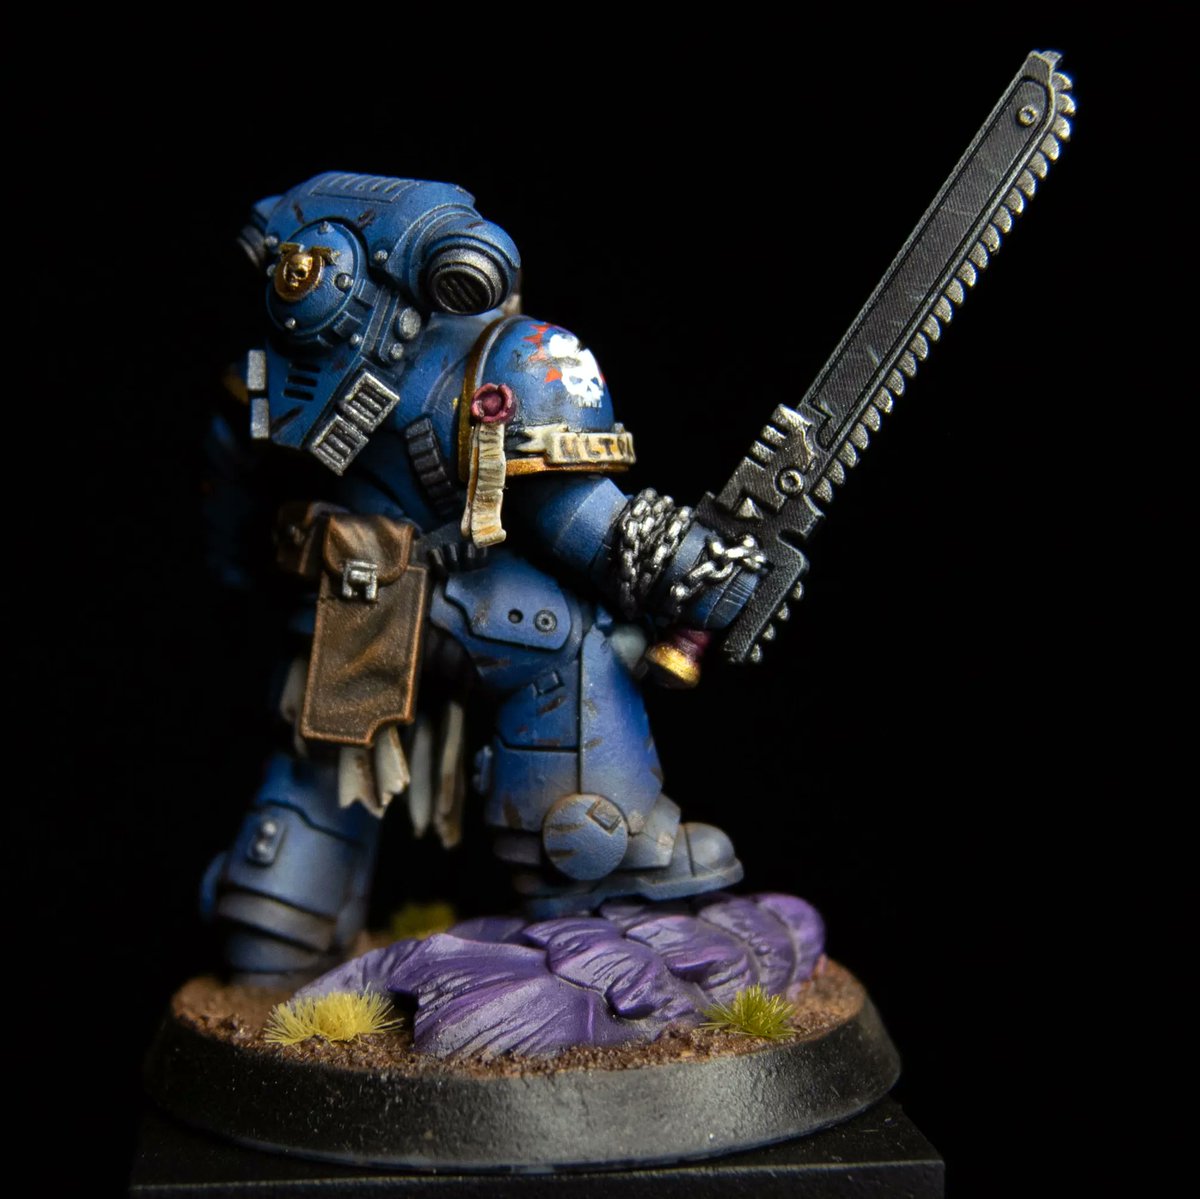 I have finished Lt. Titus. Pretty happy with how he turned out, although I went a bit overboard with the scratches.

#ultramarines #marchformacragge #spacemarines #spacemarine2 #40k #warhammer40k #paintingwarhammer40k #minipainting #lttitus